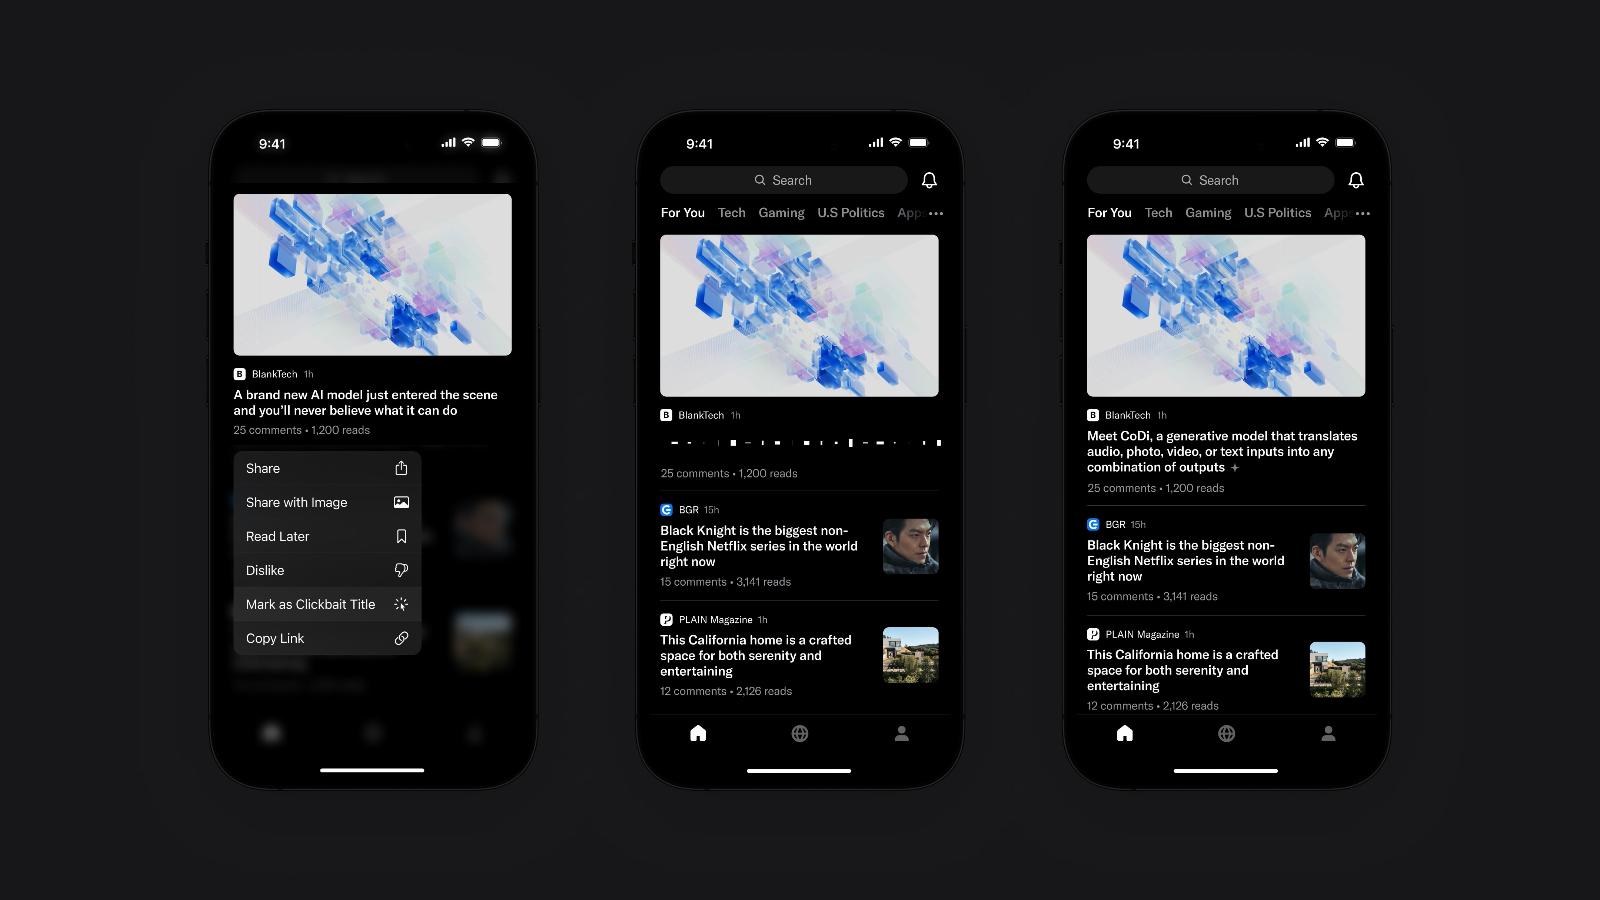 Artifact news app now uses AI to rewrite headline of a clickbait article